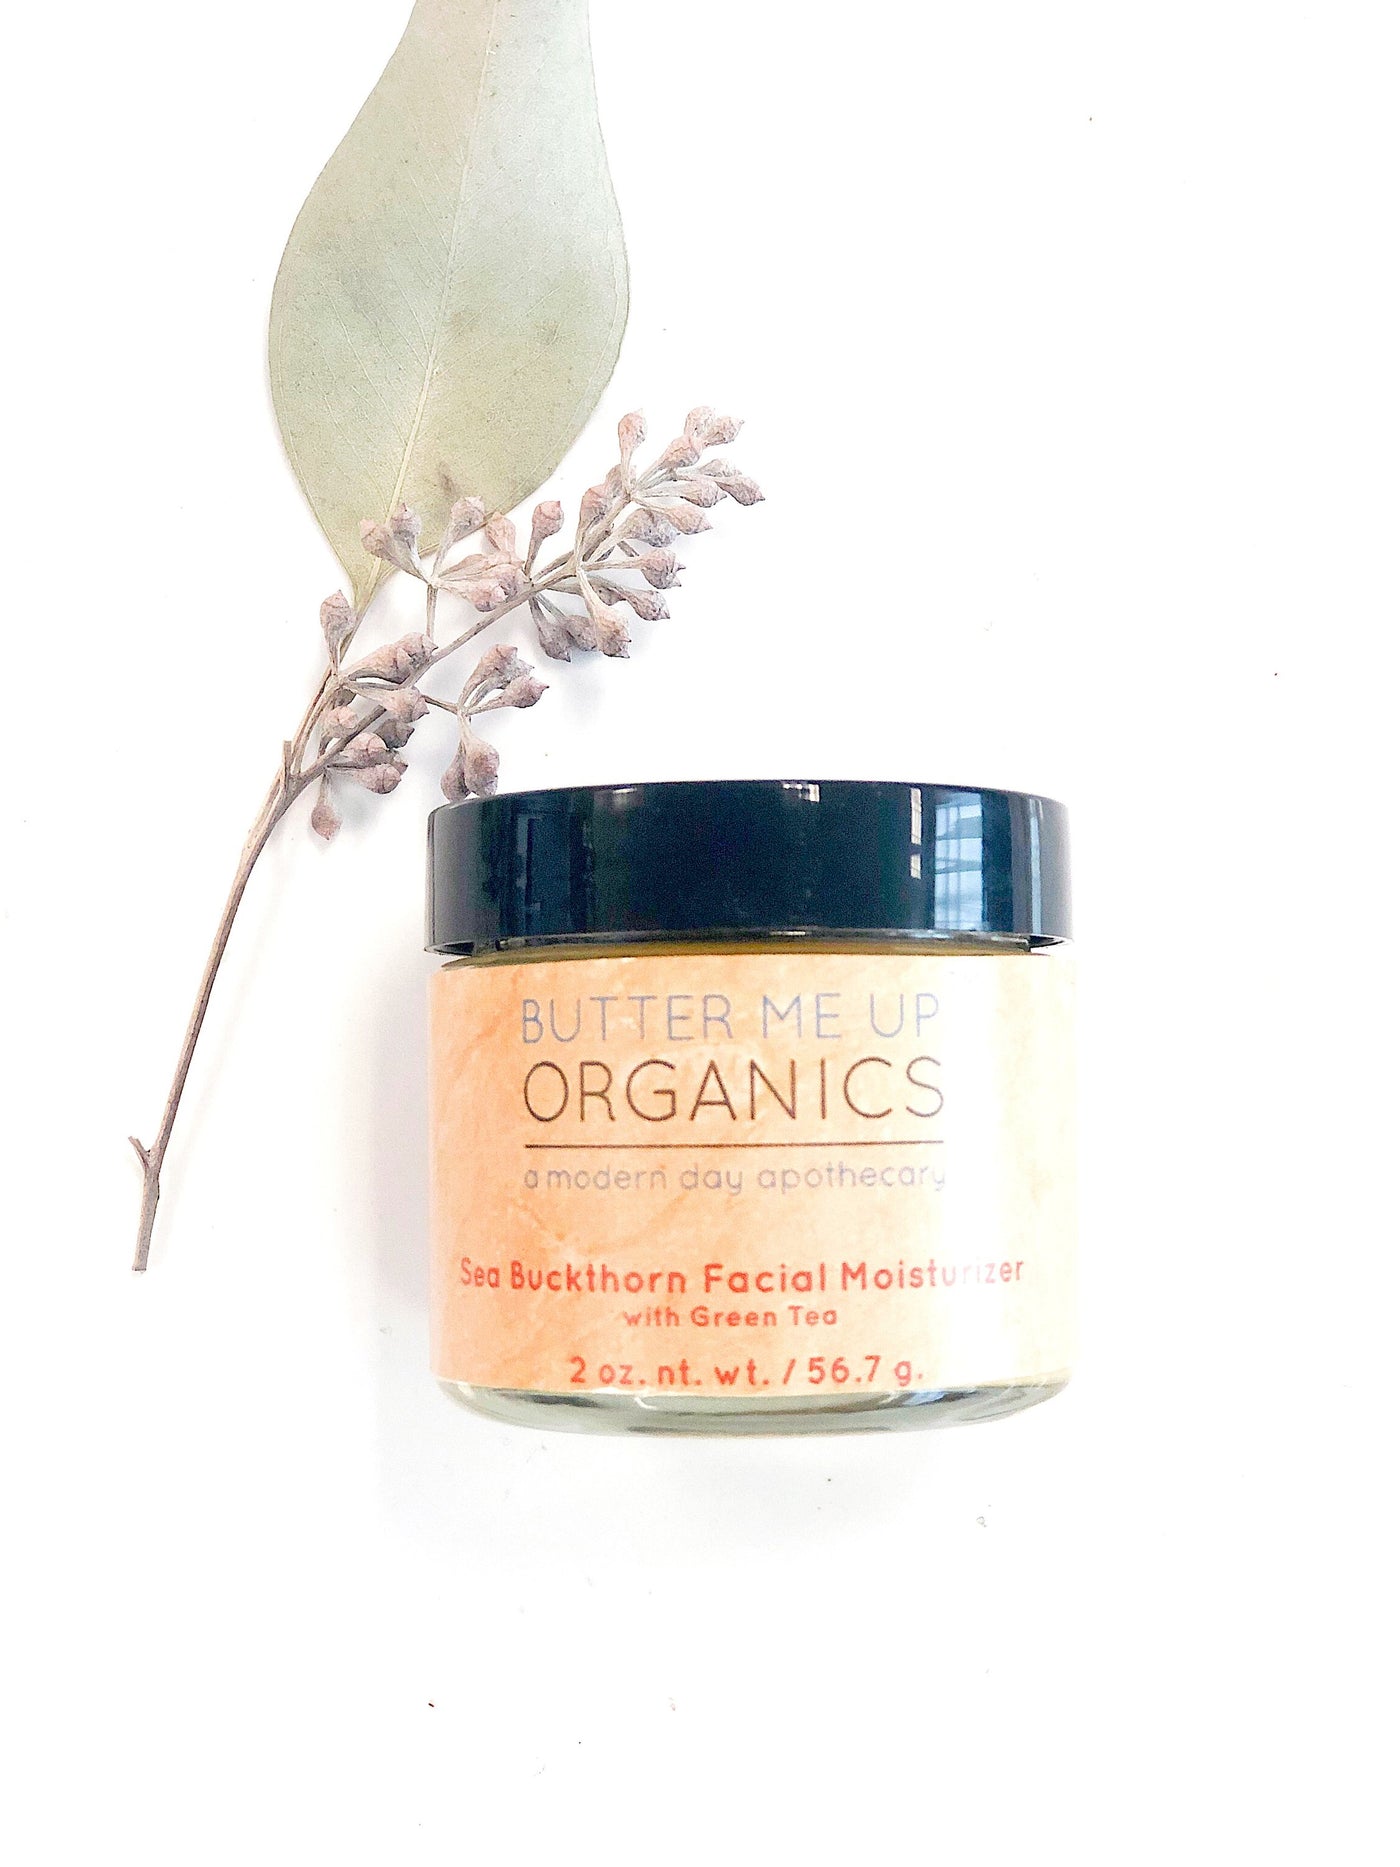 Sea Buckthorn Facial Moisturizer / Organic Face Moisturizer / Facial - Roses & Chains | Fashionable Clothing, Shoes, Accessories, & More